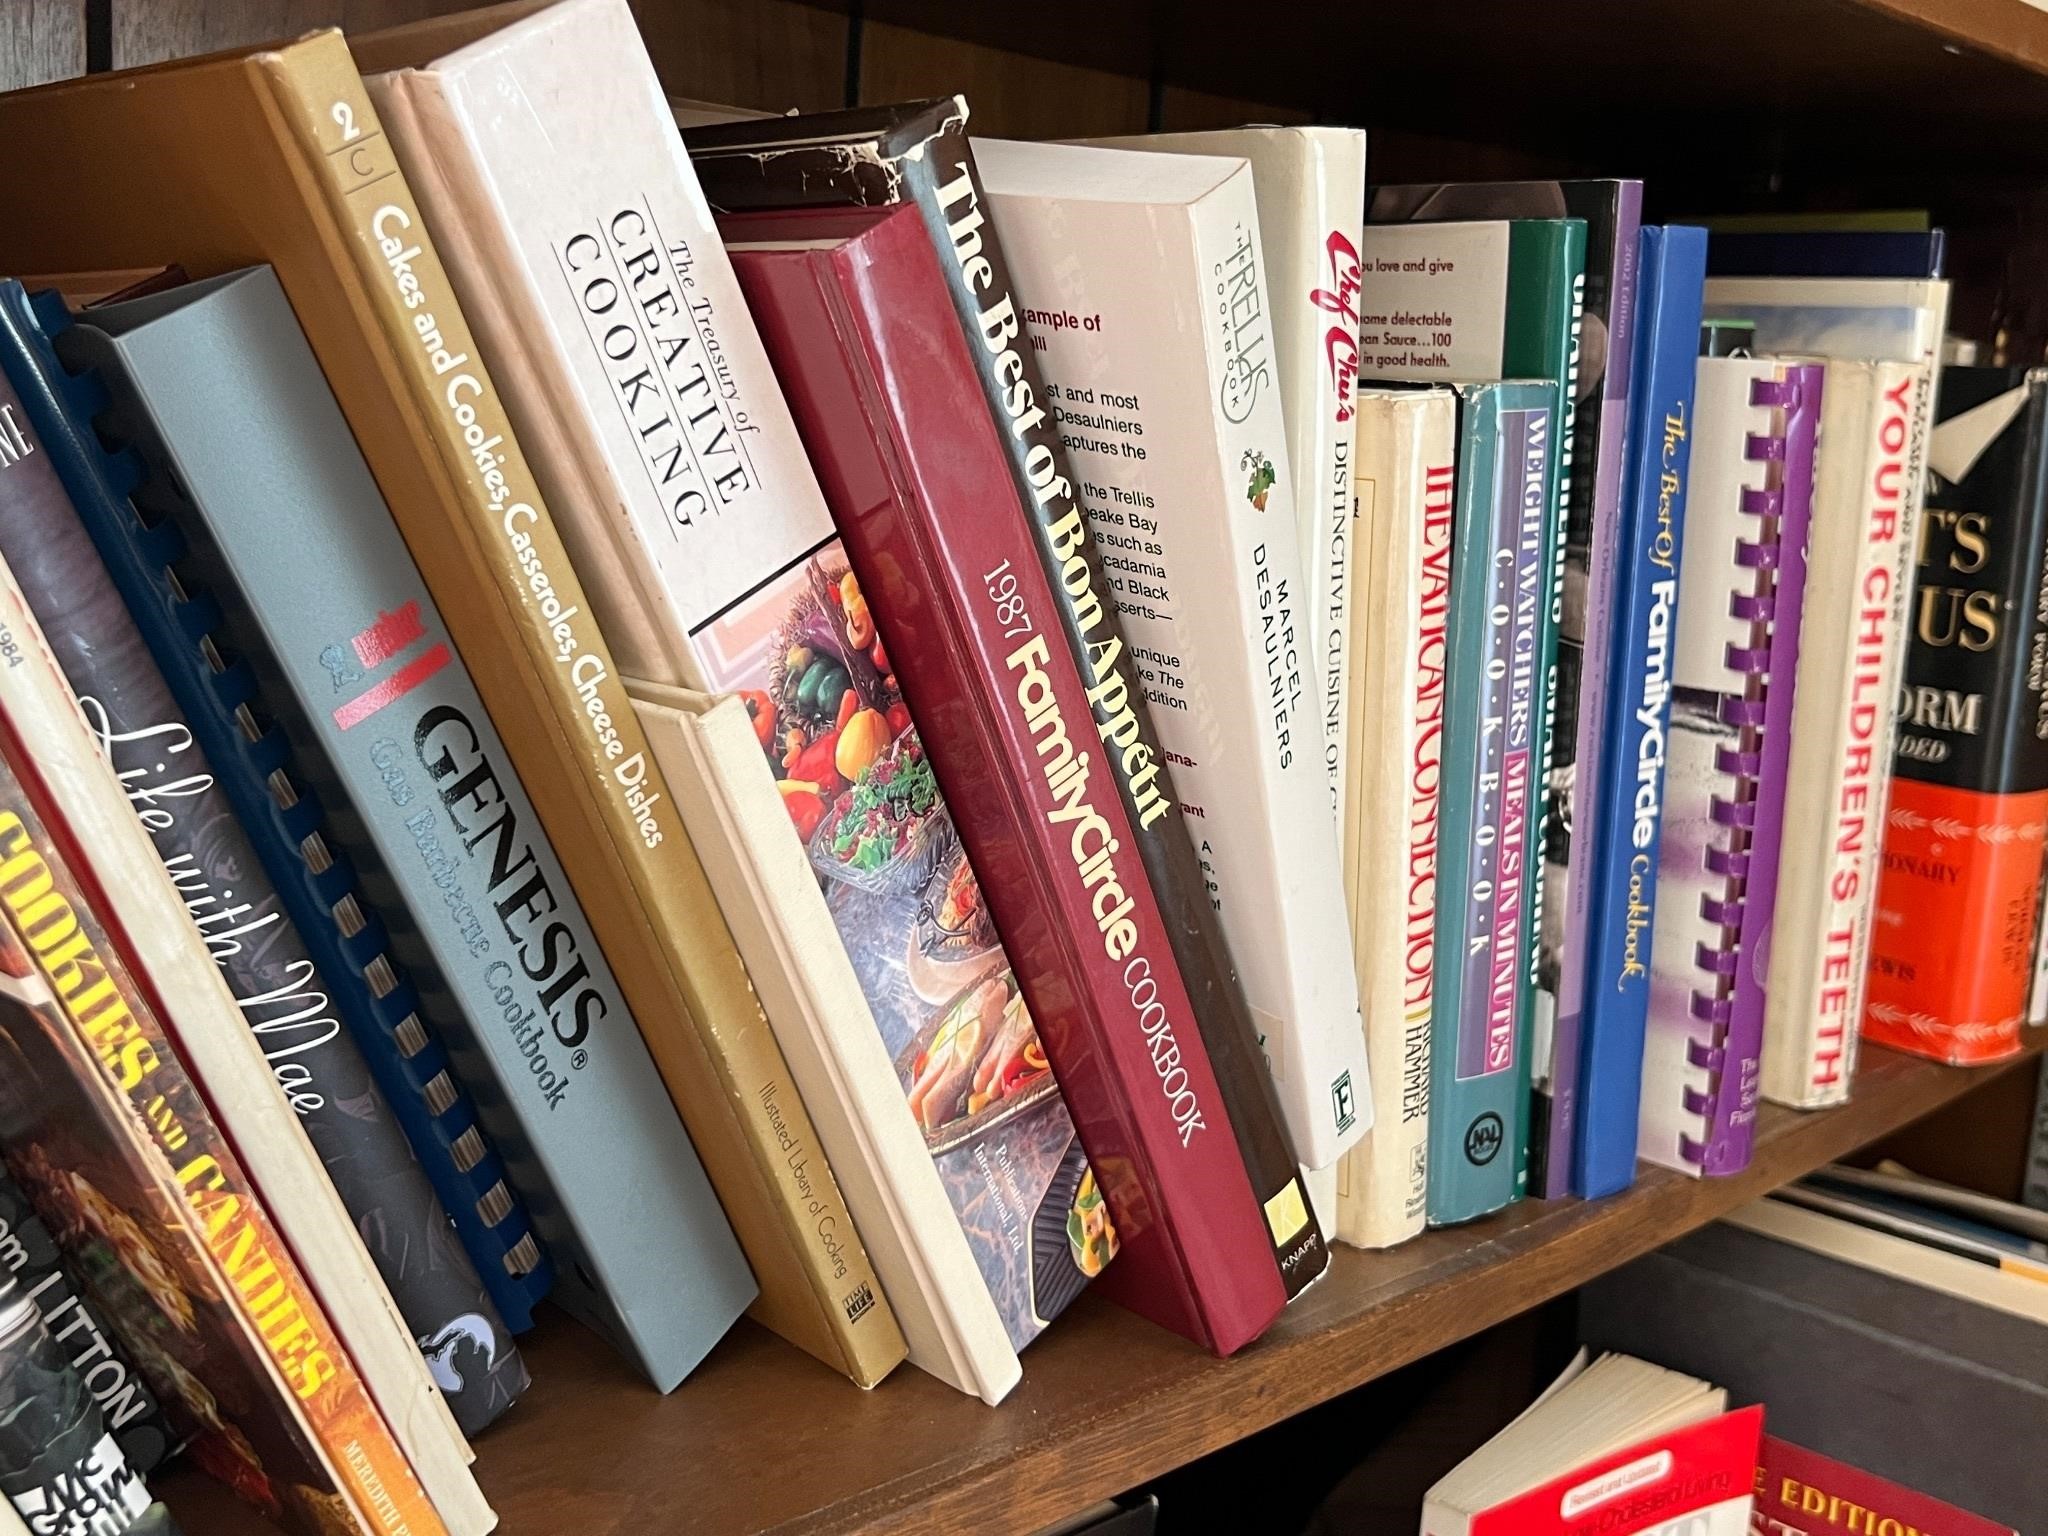 Collection of Books Mostly Cookbooks